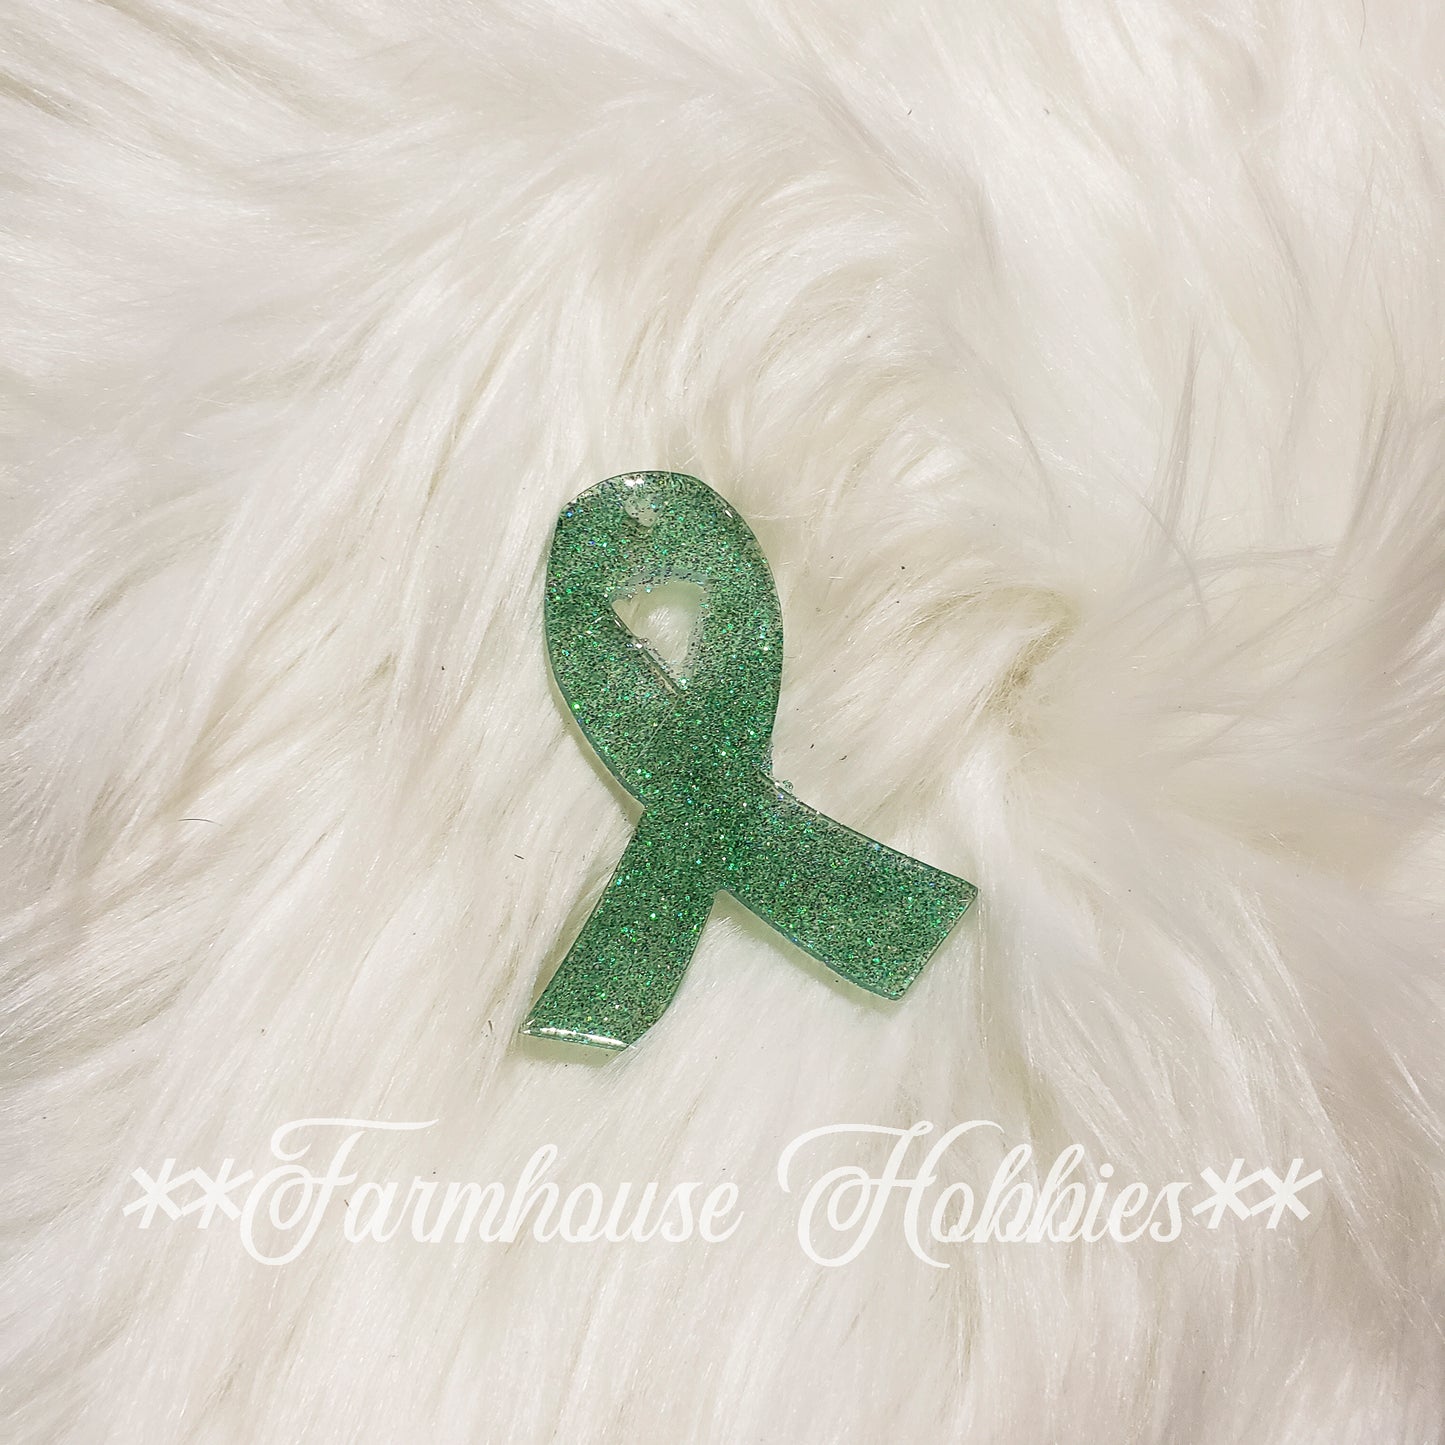 Large Keychain - Green Cancer Ribbon Home Decor/Accessories Farmhouse Hobbies   